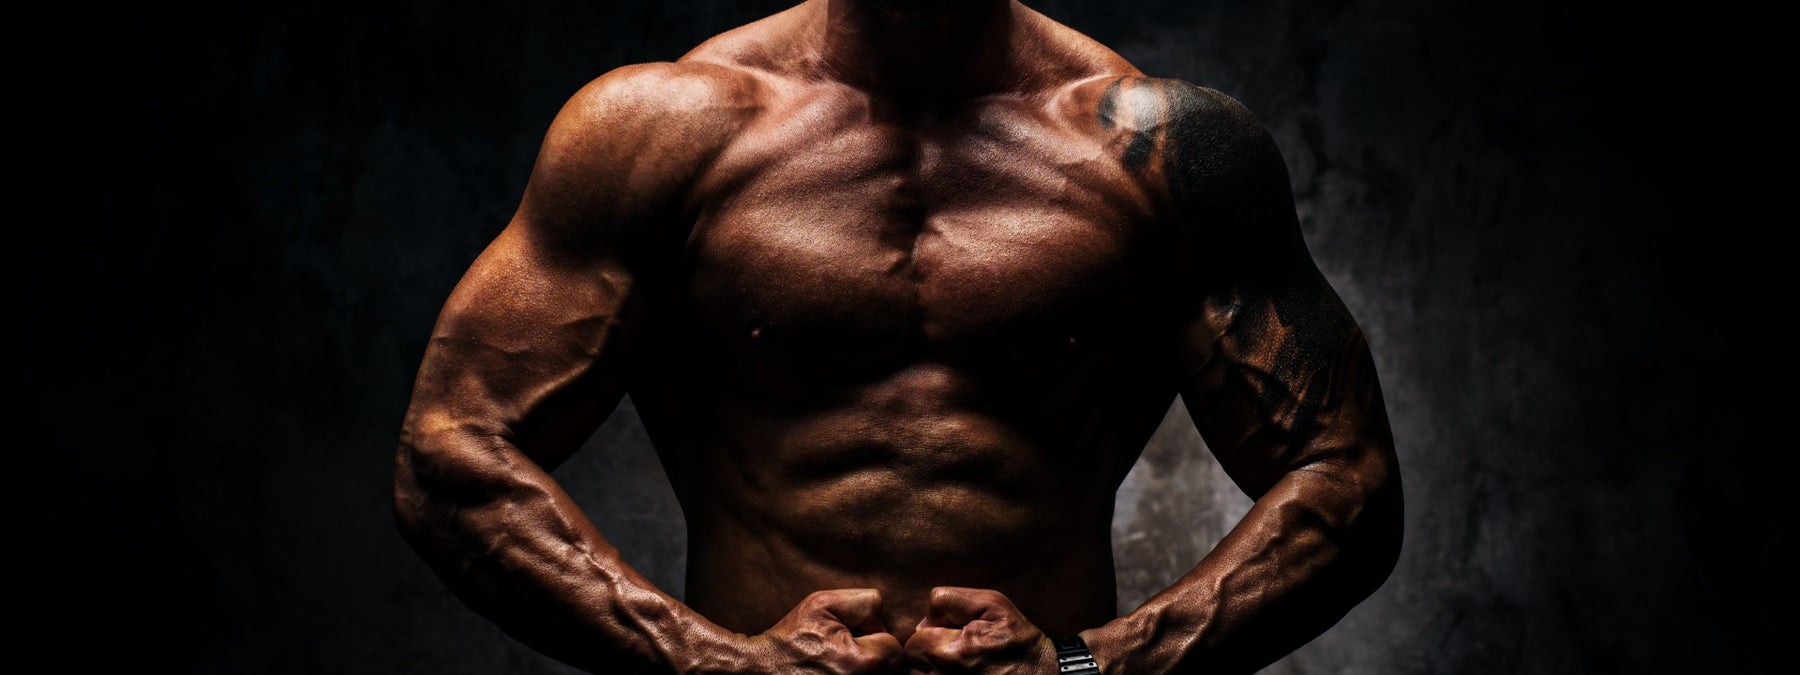 17 Tips to Drive Better Upper Body Gains